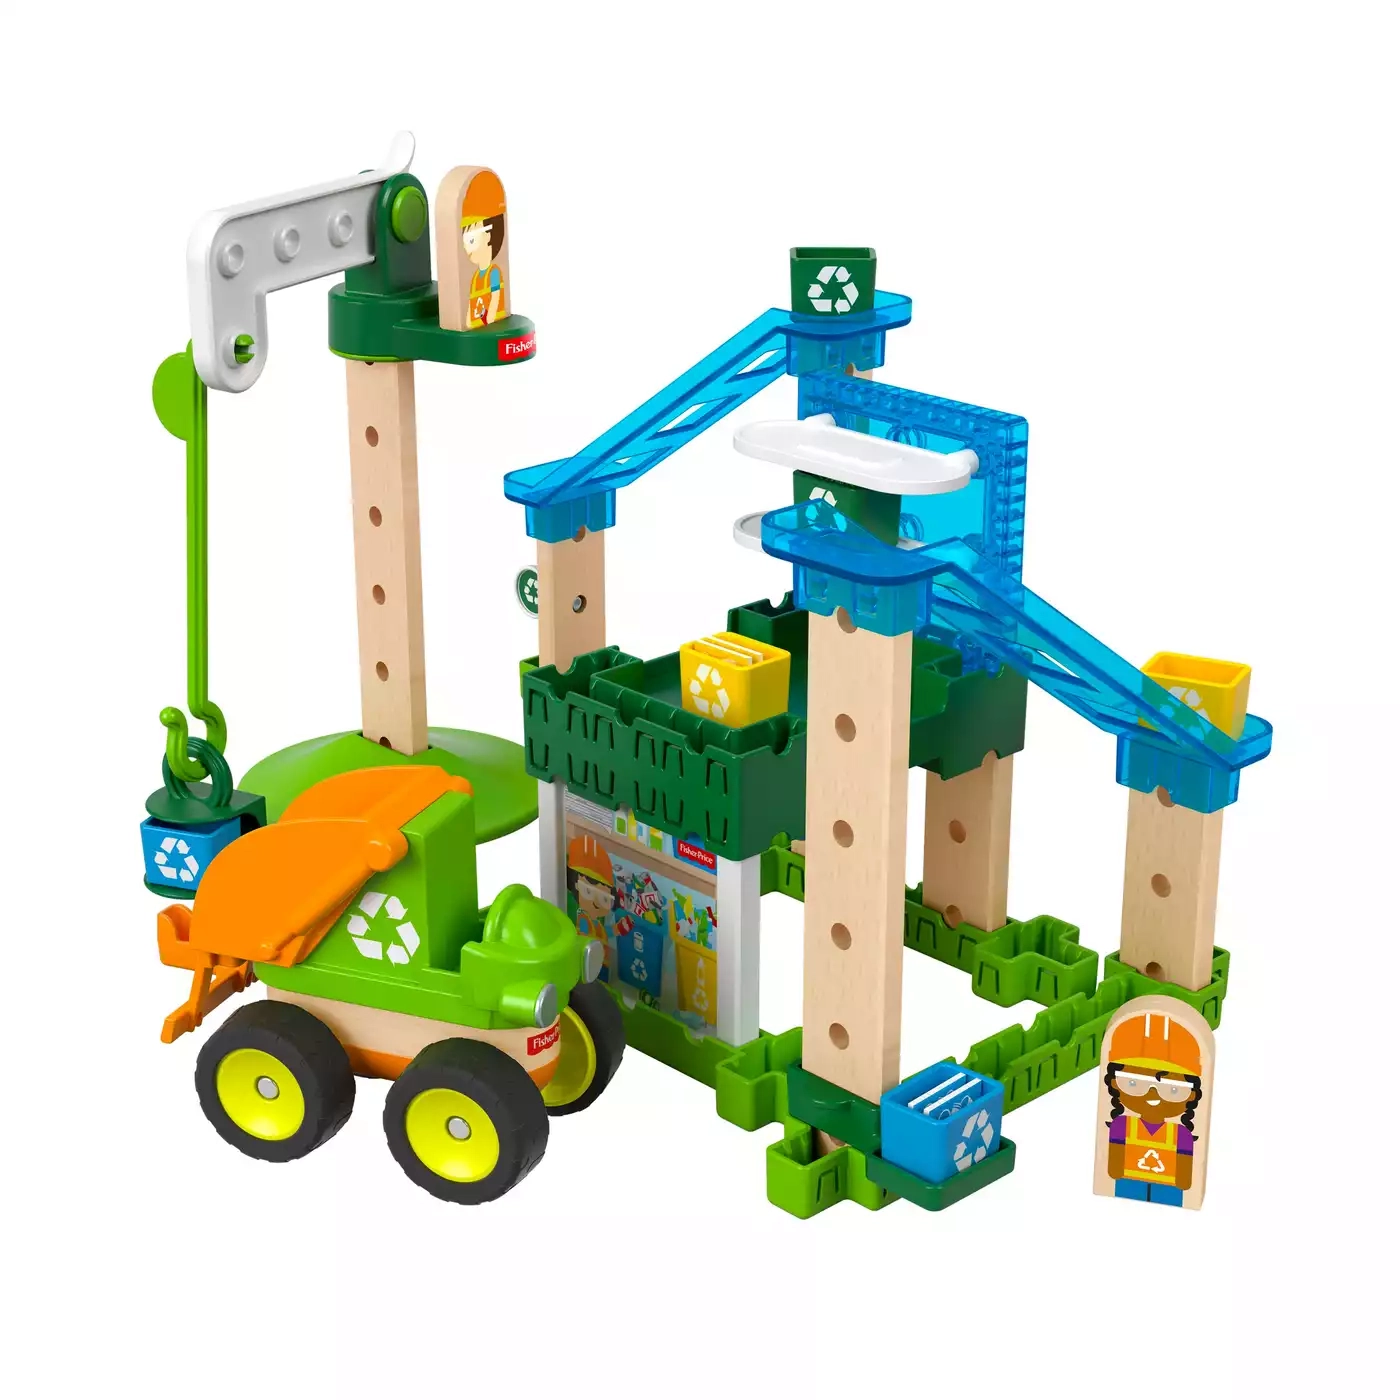 Wunder Werker Recycling Center Fisher Price 2000577475728 3